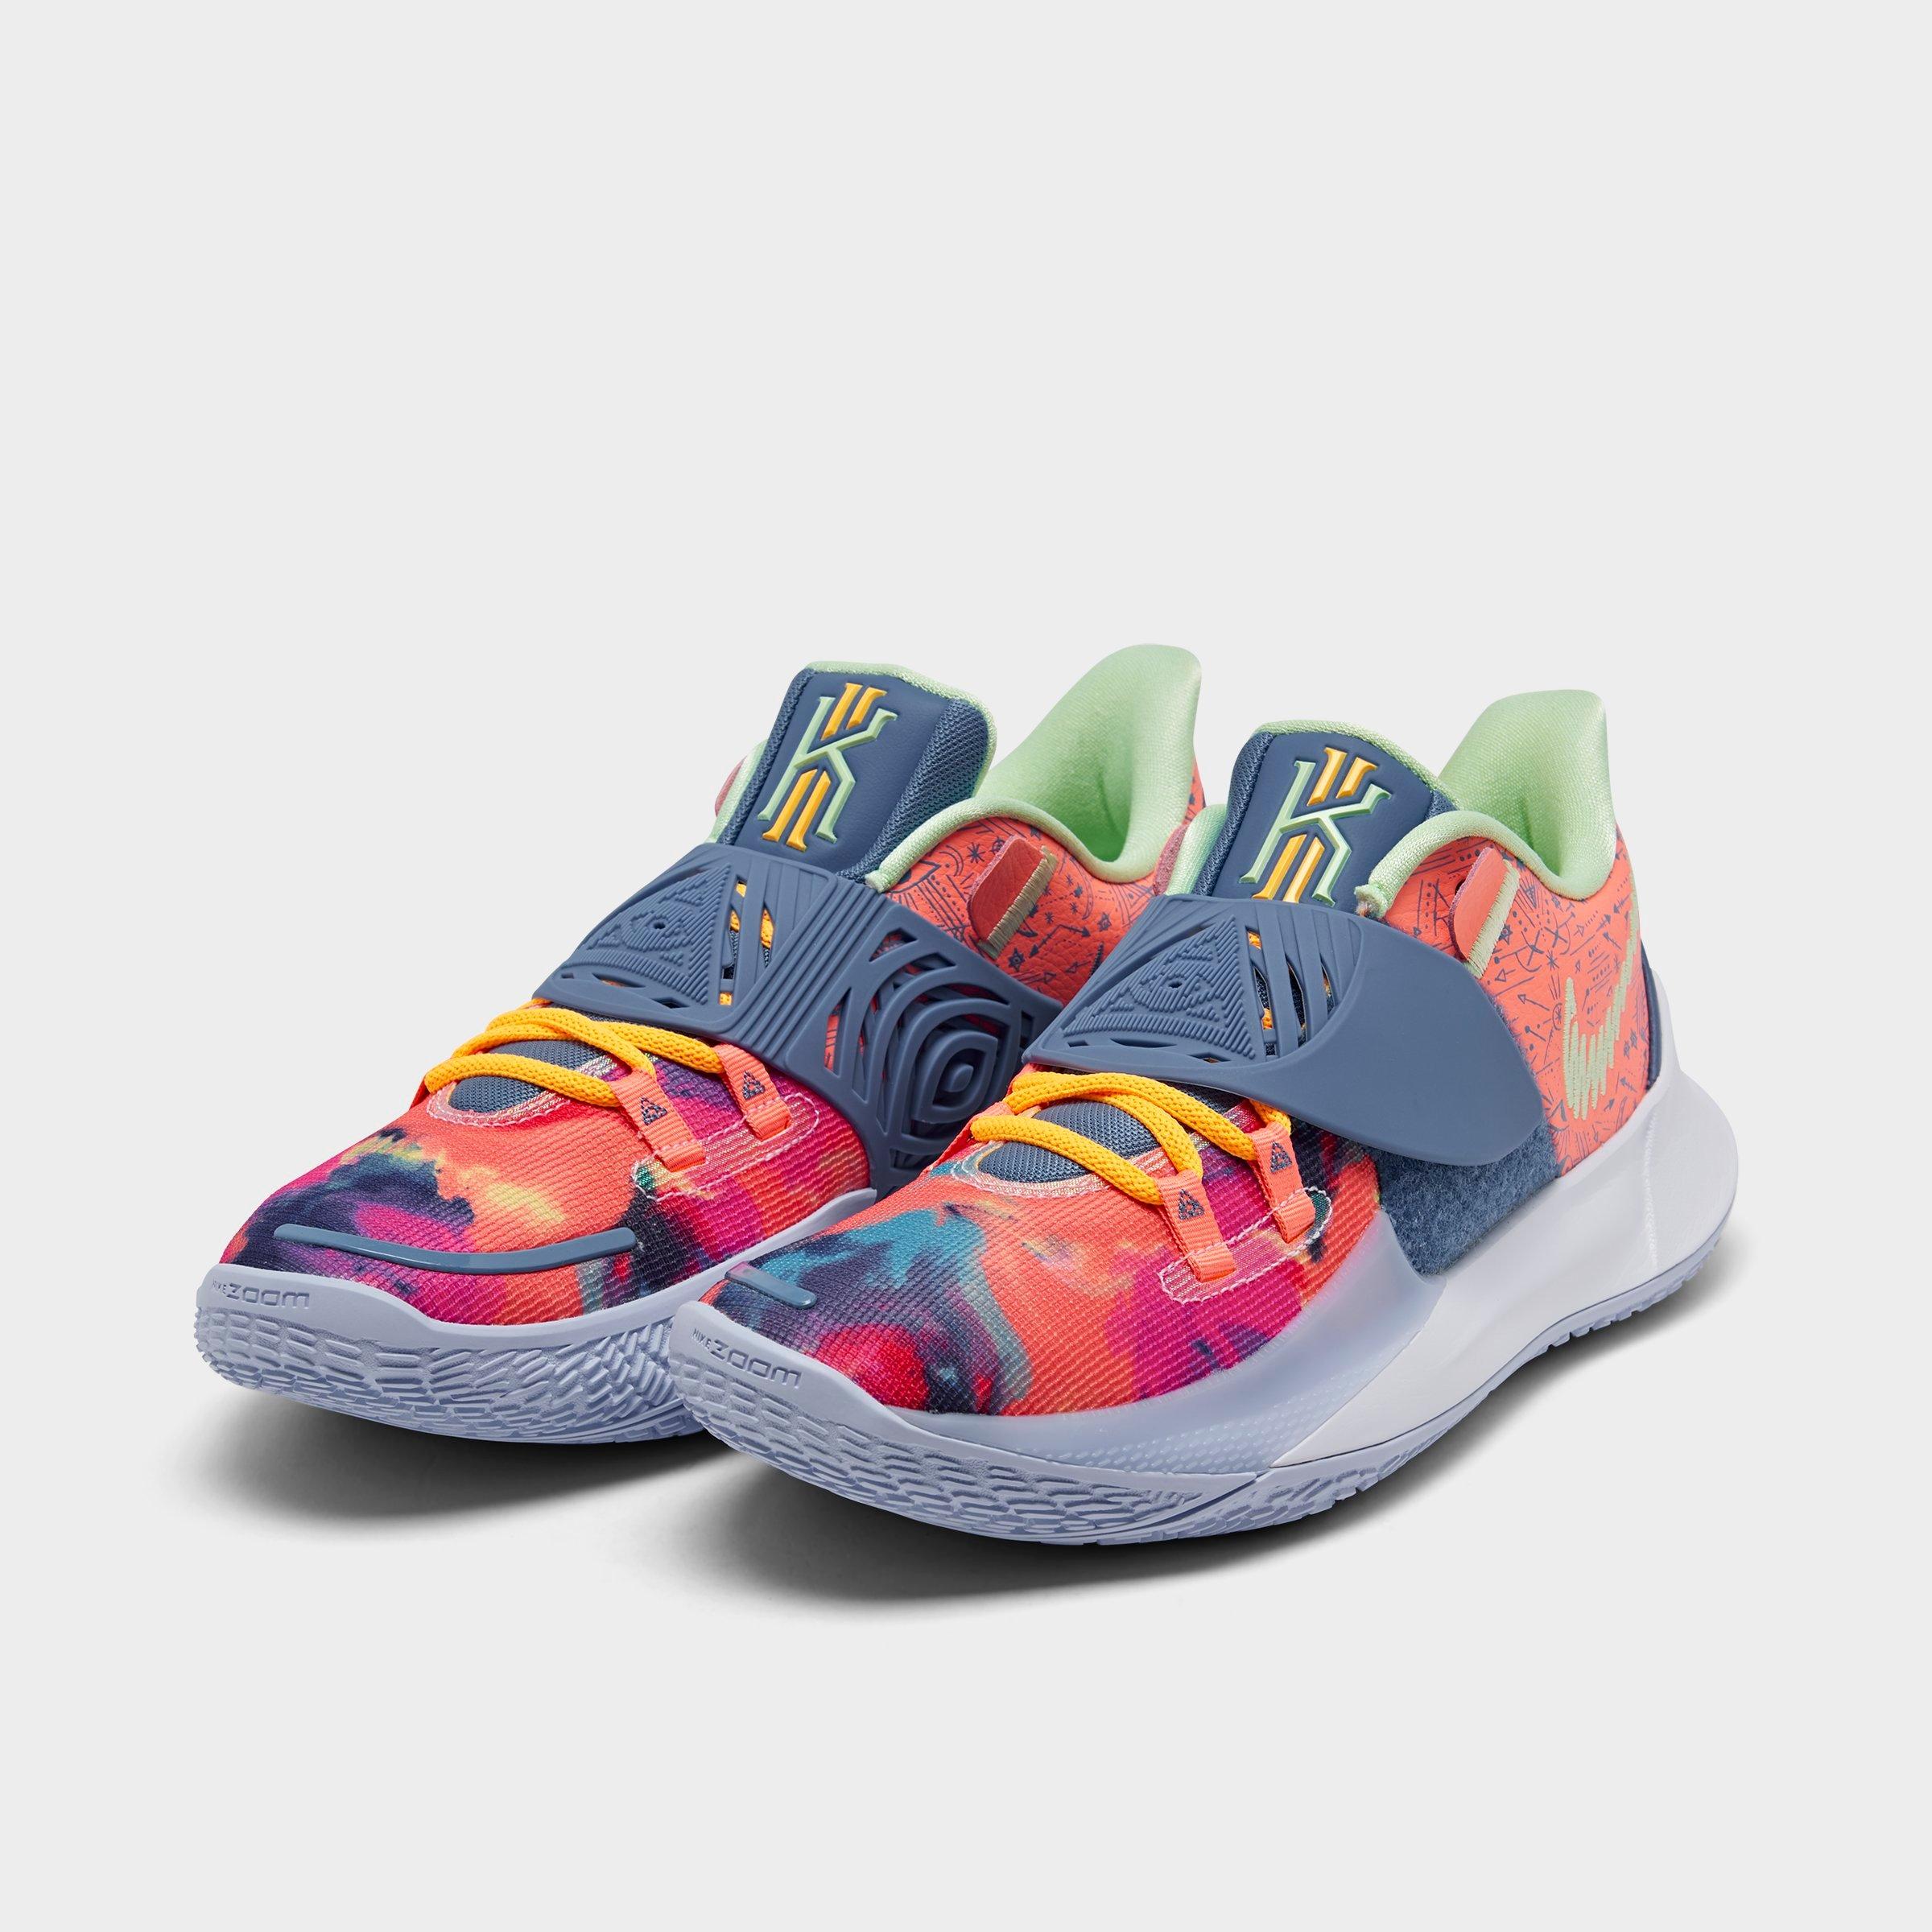 kyrie low top shoes